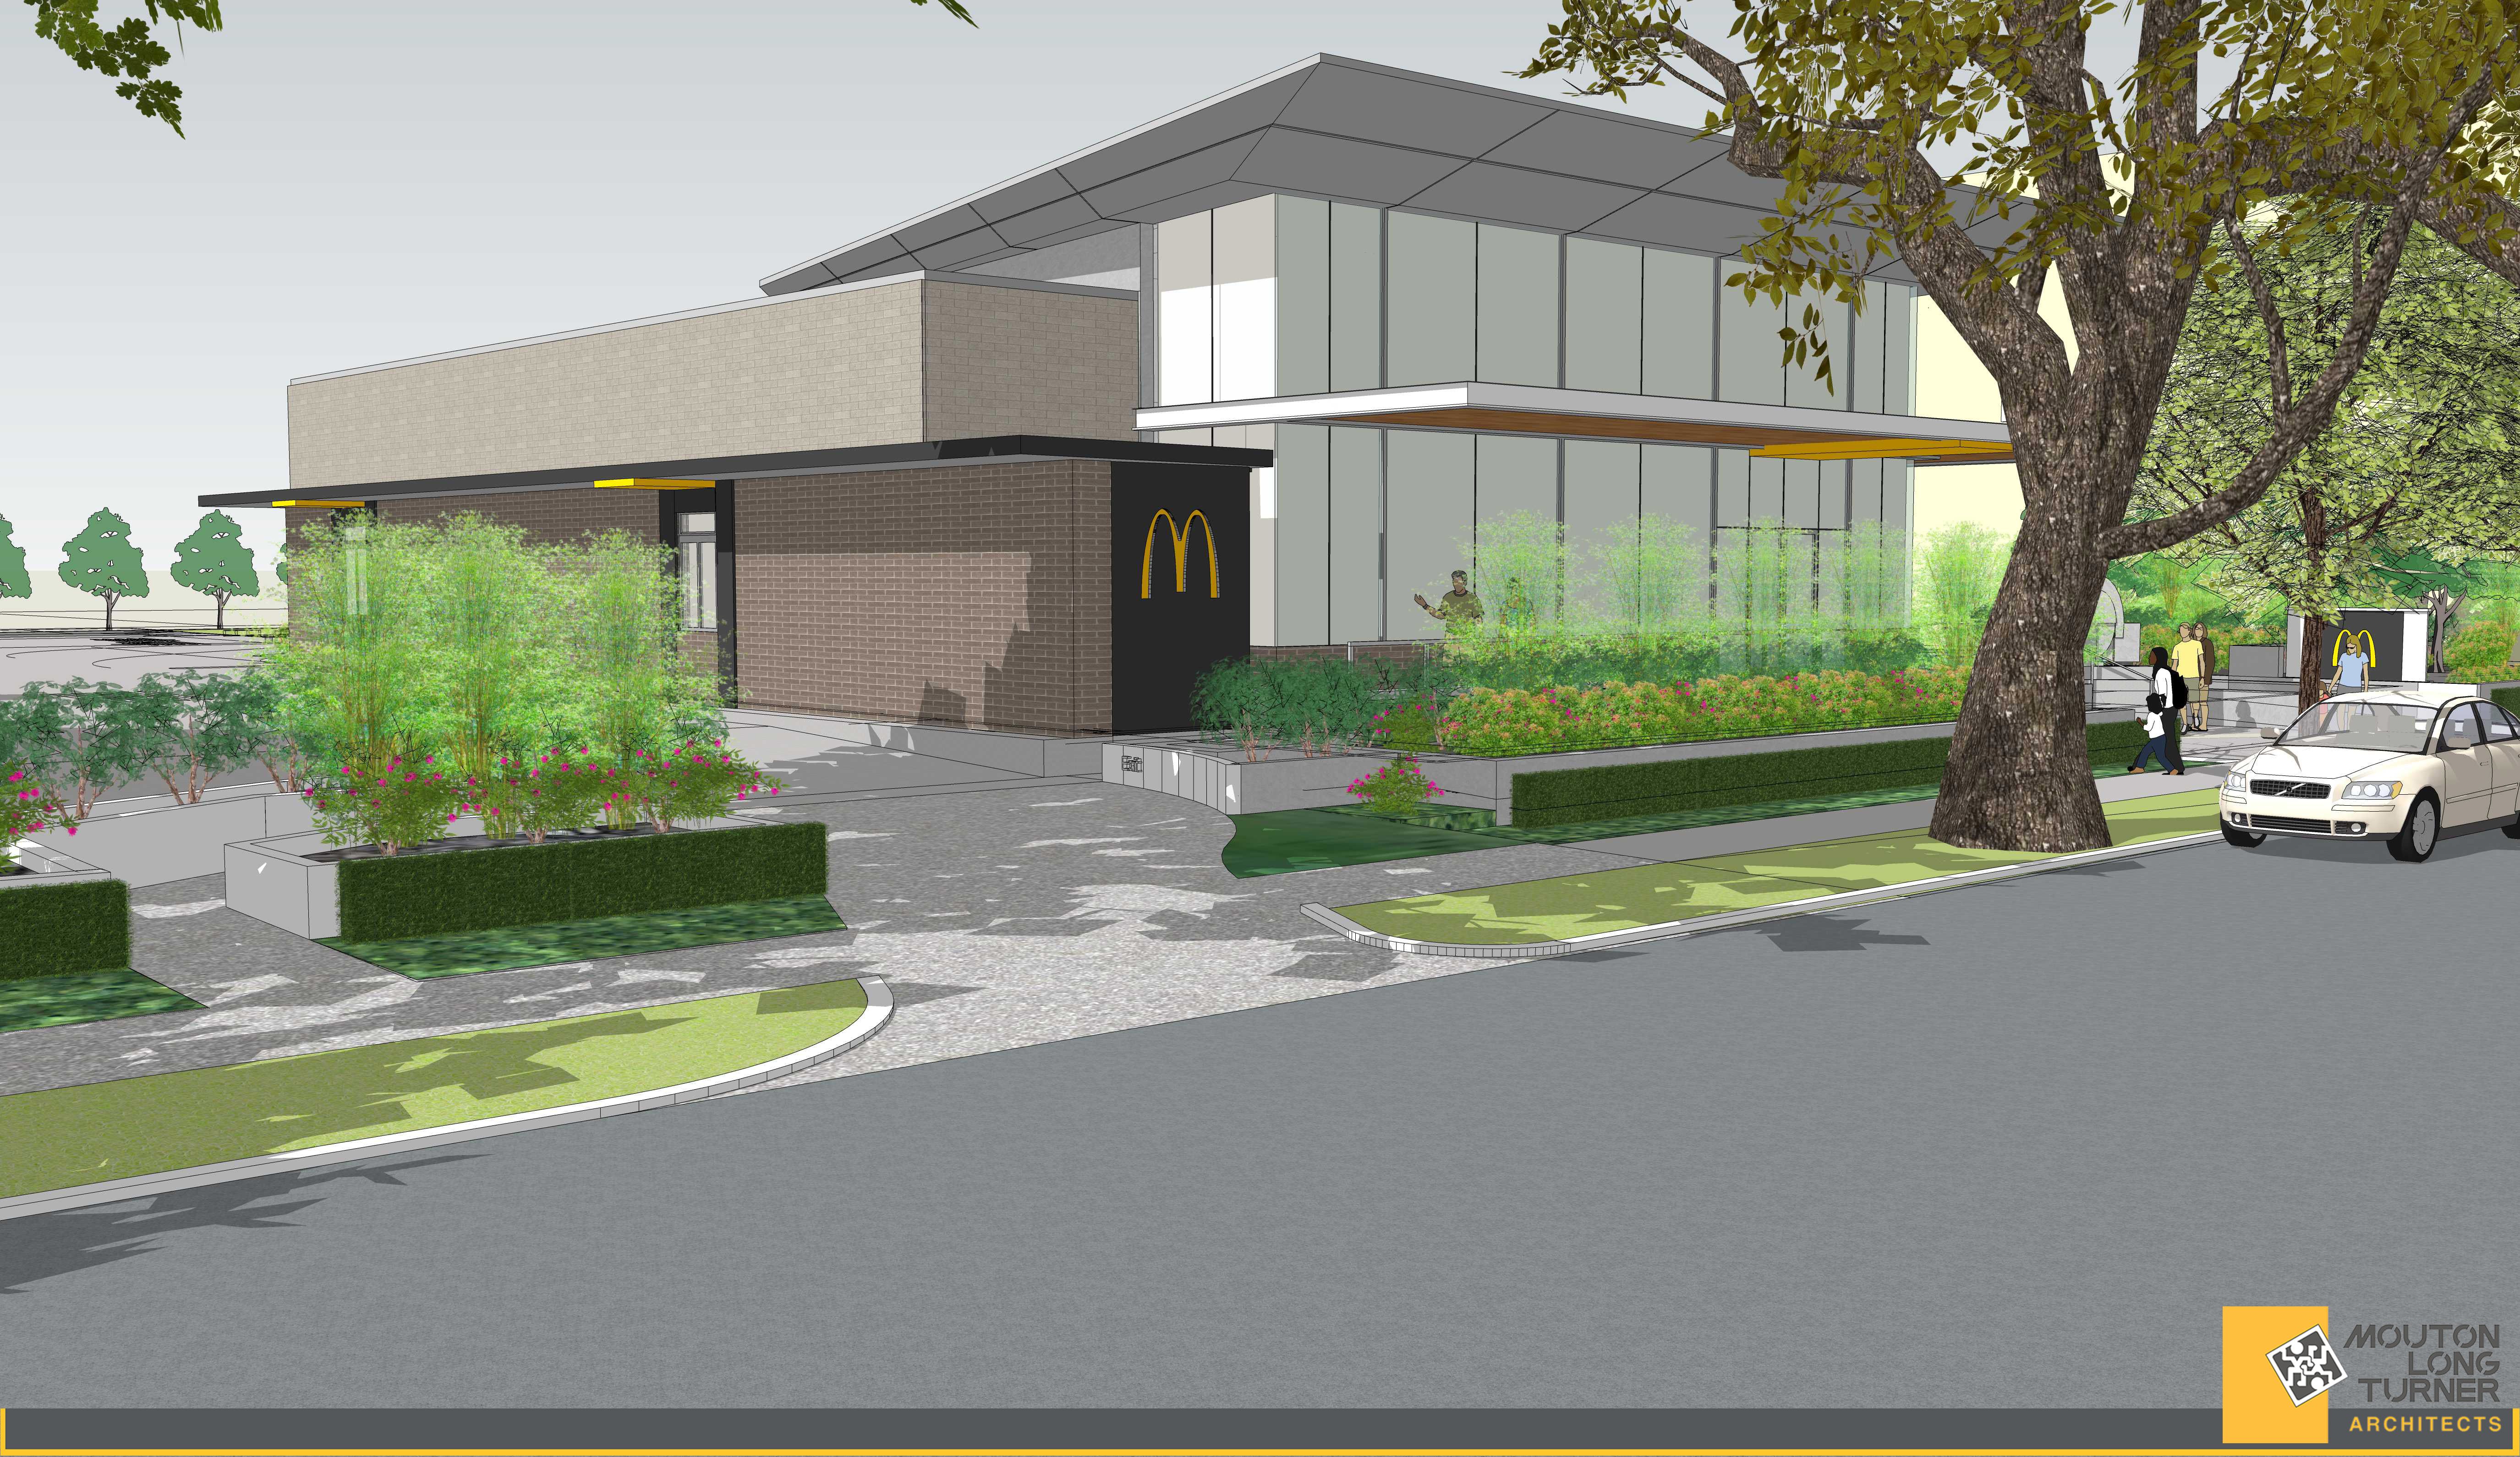 A rendering of the new St. Charles Avenue McDonald's viewed from the drive-through side. Cars from the drive-through will exit directly onto St. Charles Avenue.